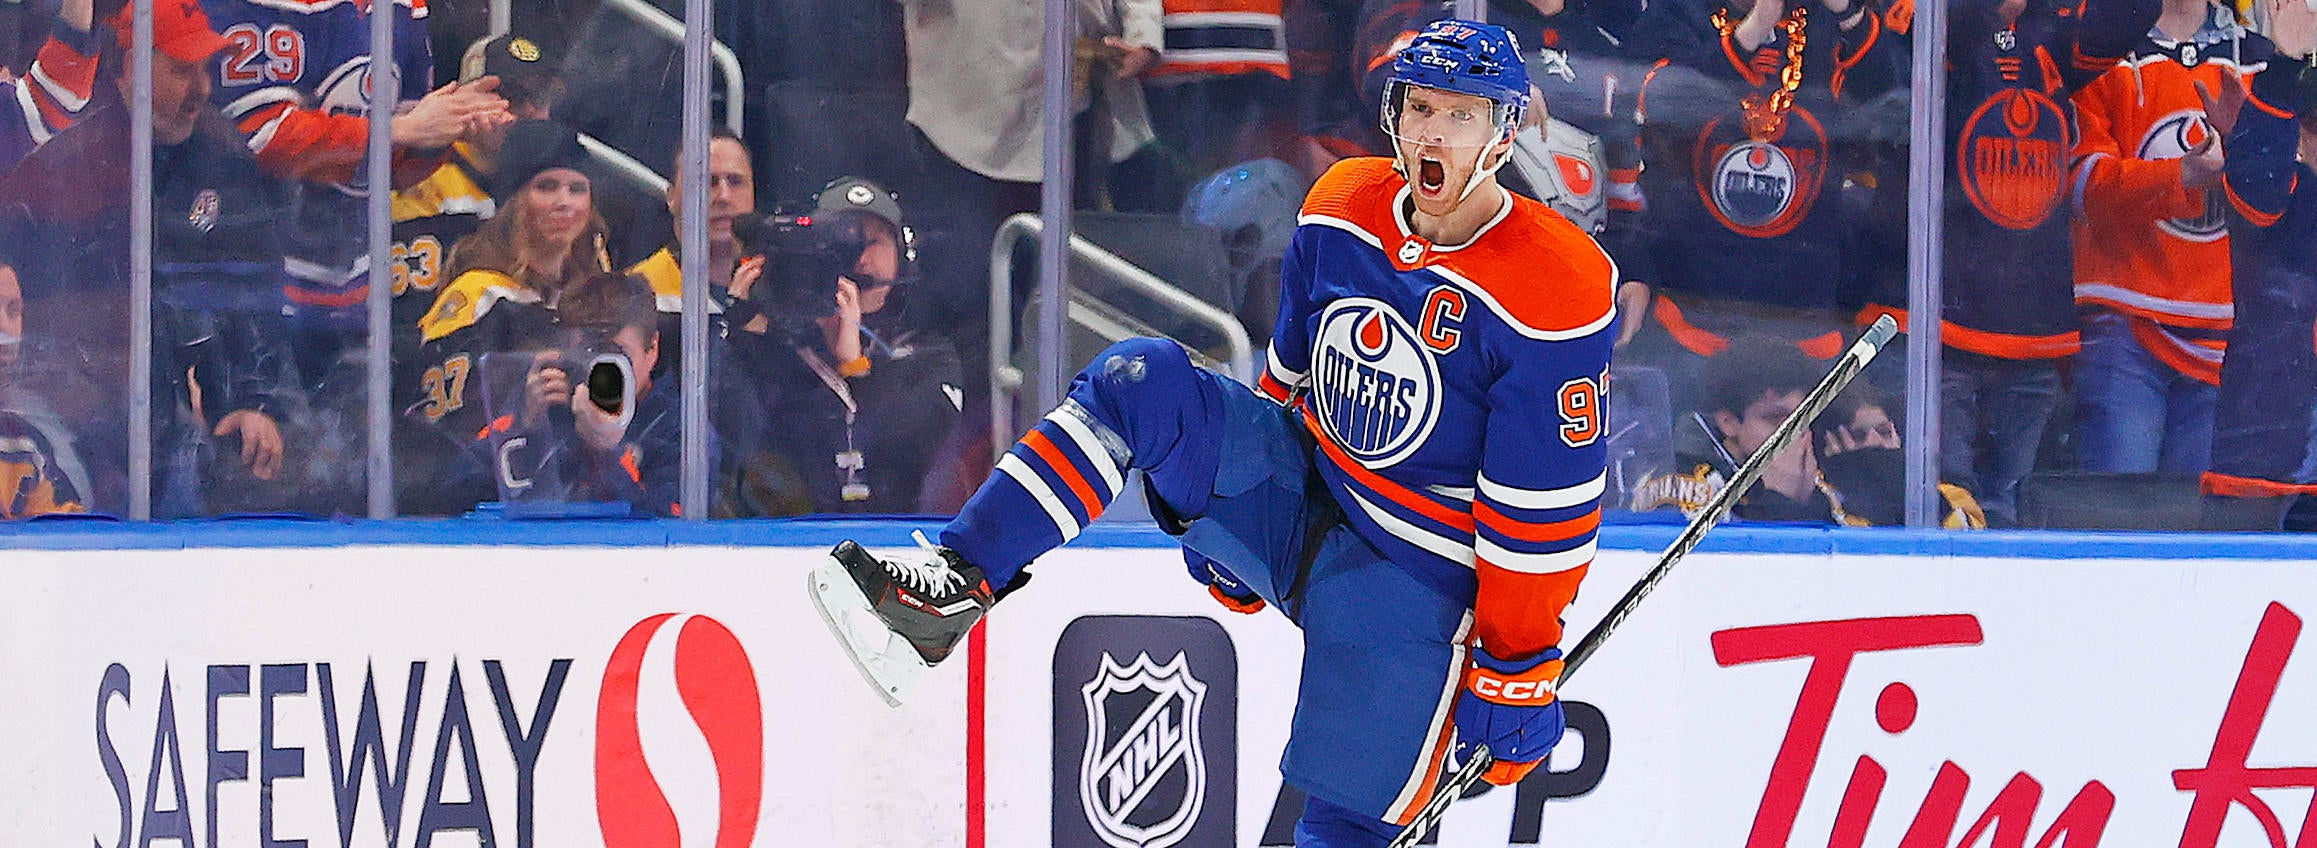 2024 Hart Trophy odds: Oilers' Connor McDavid clear favorite to win NHL MVP honors next year for second straight season, fourth time overall